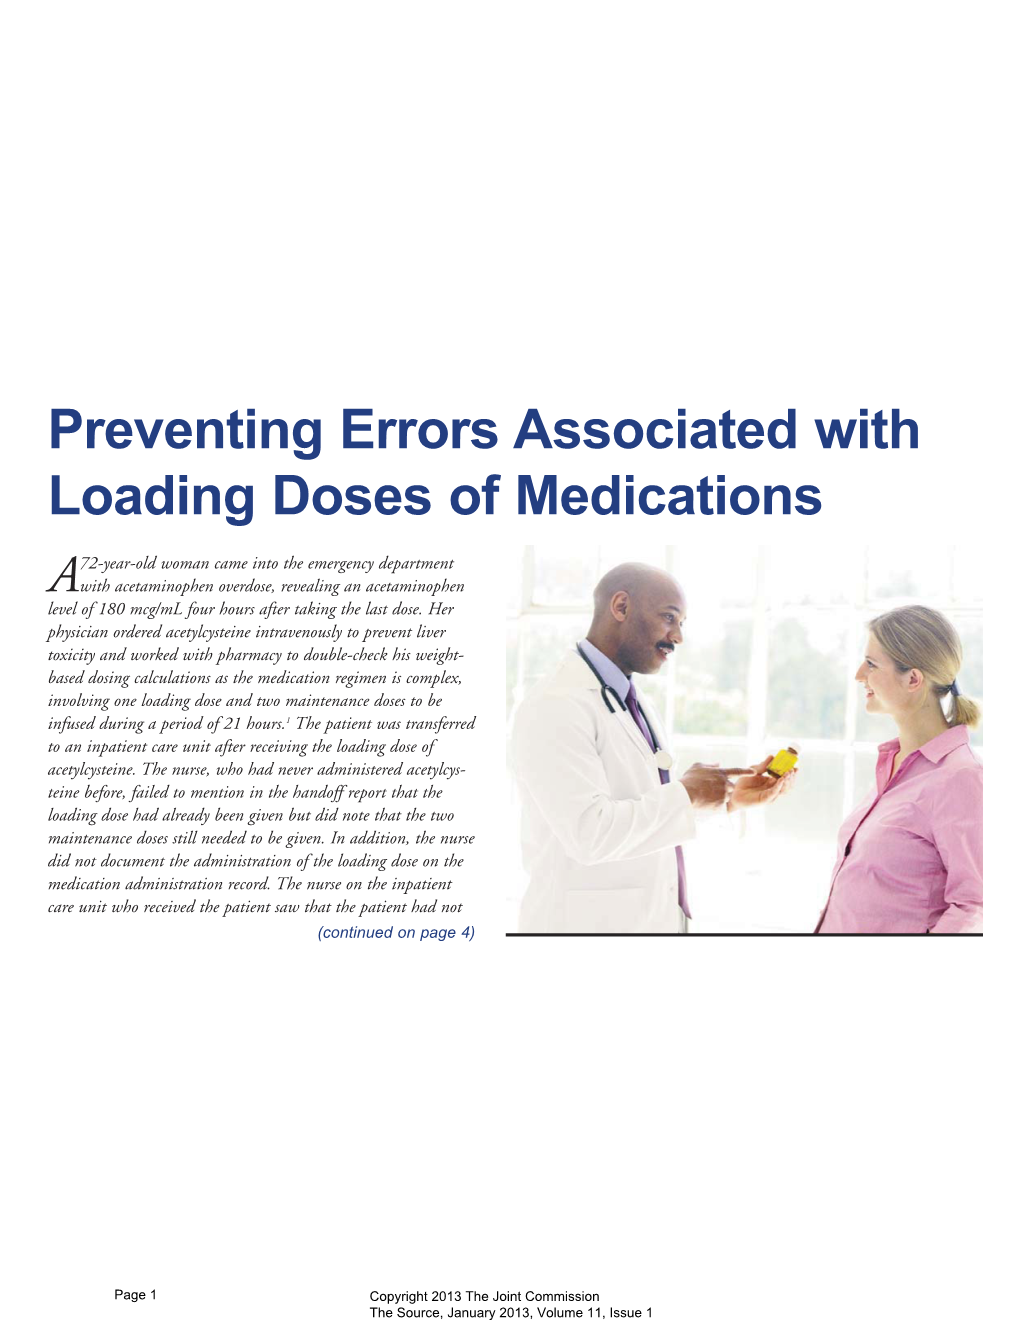 Preventing Errors Associated with Loading Doses of Medications